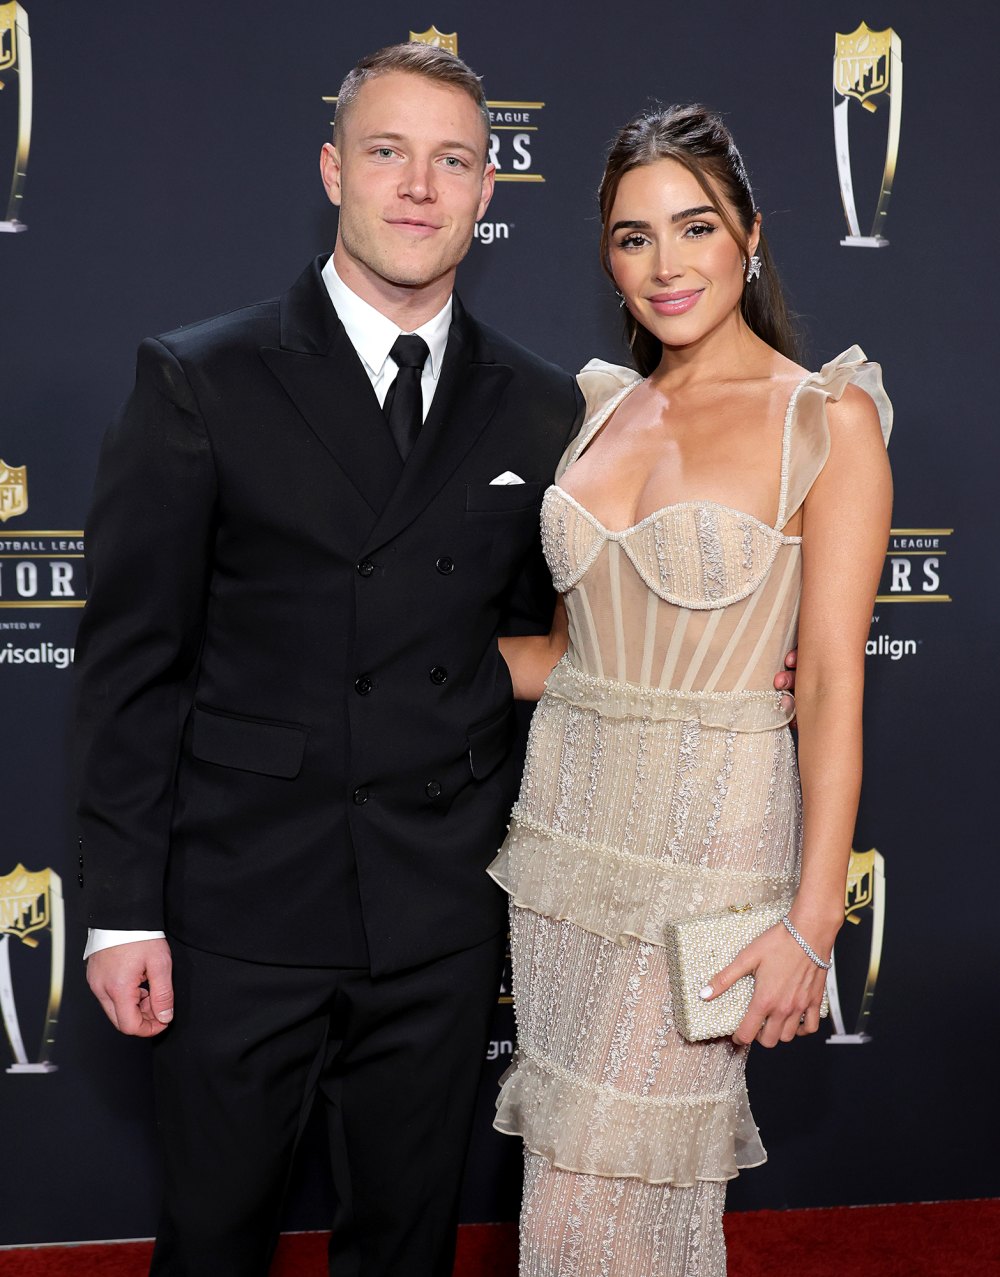 Olivia Culpo Ends Up Purchasing Super Bowl Suite as Birthday Present for Christian McCaffrey's Mom